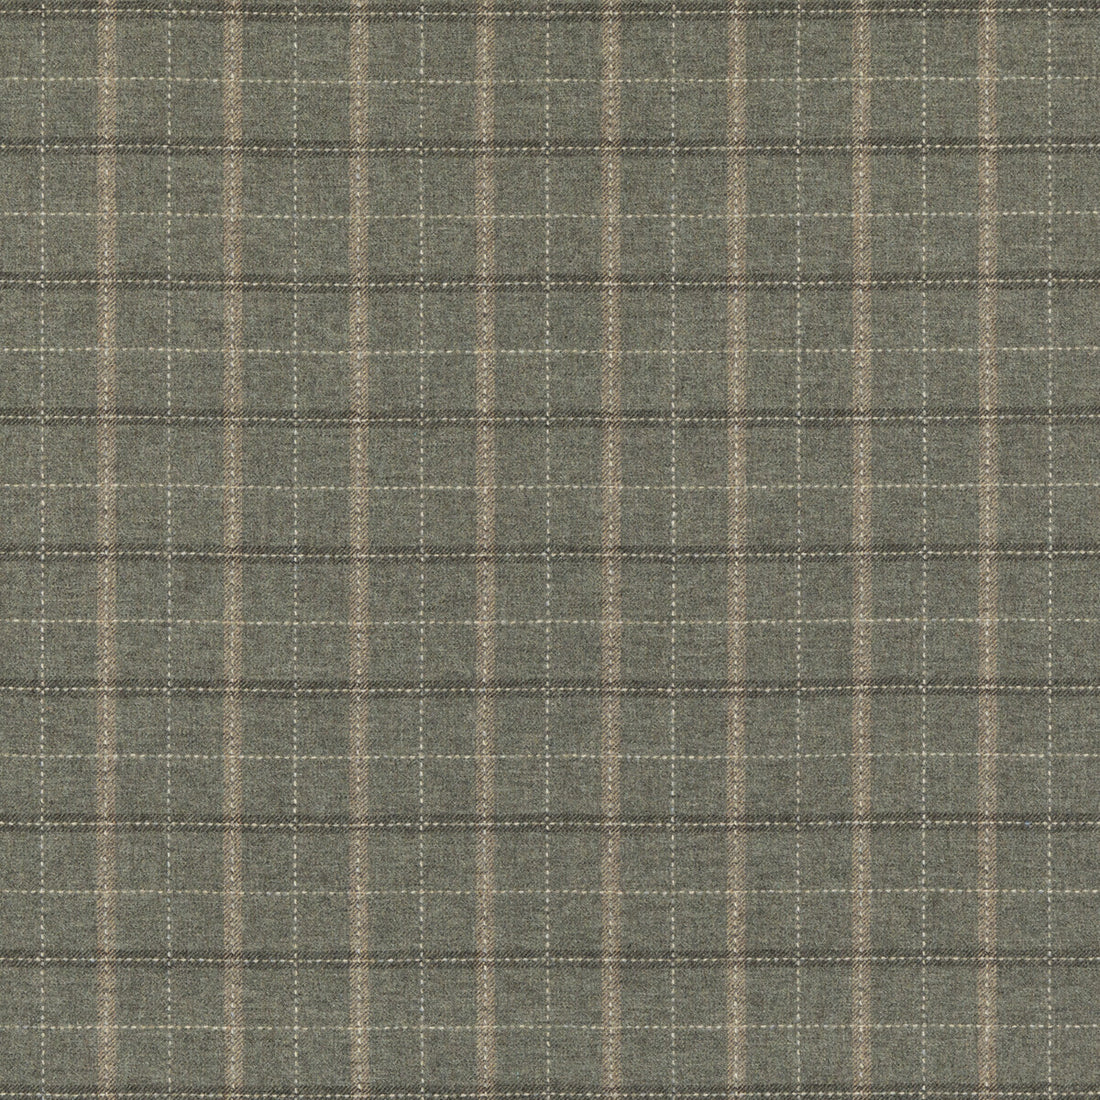 Bowmont fabric in dove color - pattern FD806.A22.0 - by Mulberry in the Mulberry Wools IV collection